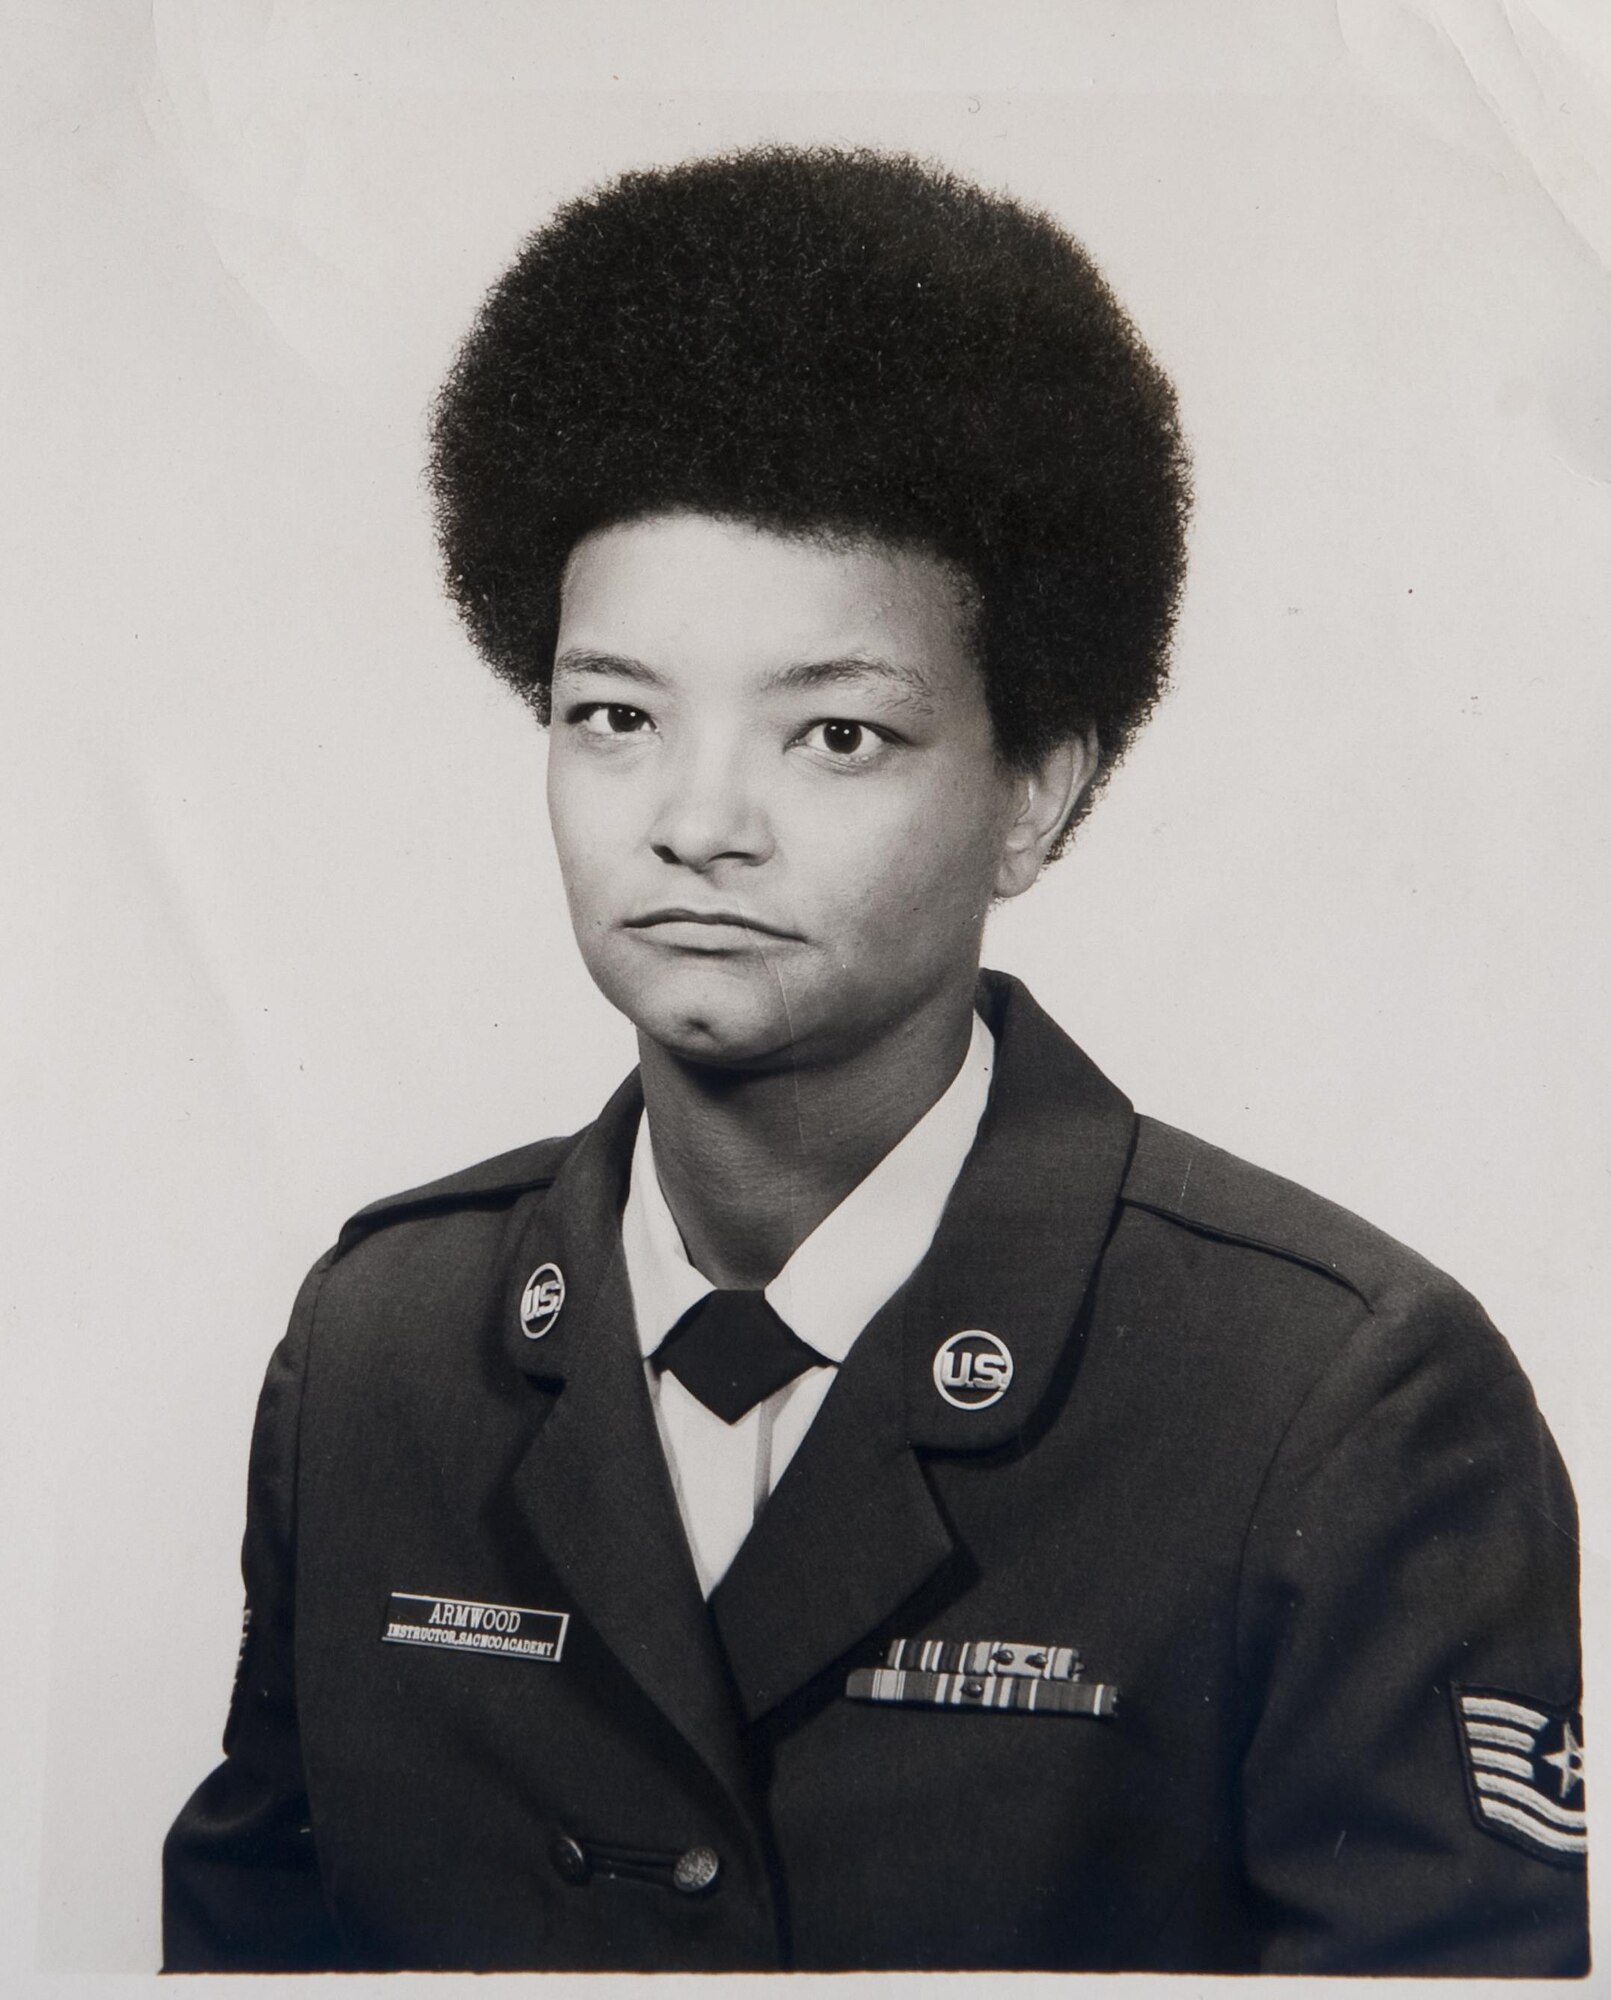 Tech. Sgt. Dale Armwood instructor photo when she taught Seminar C "World Affairs" at the Strategic Air Command NCO Academy. It was not uncommon for students to initially doubted her abilities as an instructor because she was a woman, but left convinced she was the best, as attested by a Best Seminar Award program that began and ended with her always winning.  (U.S. Air Force photo/Staff Sgt. Bennie Davis III)